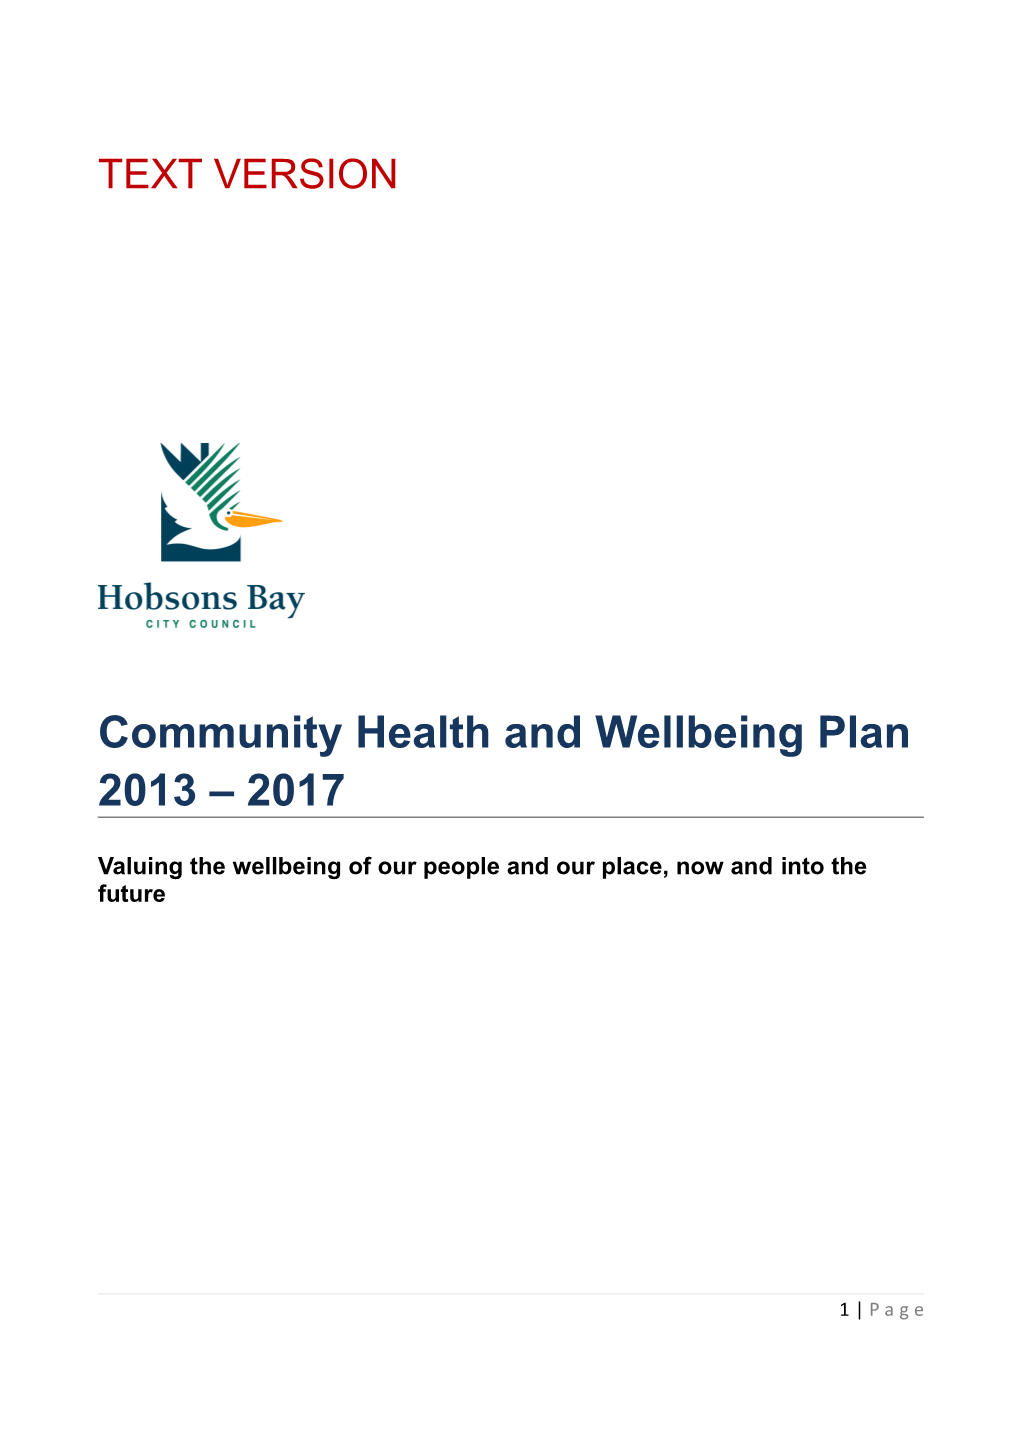 Community Health and Wellbeing Plan 2013 2017